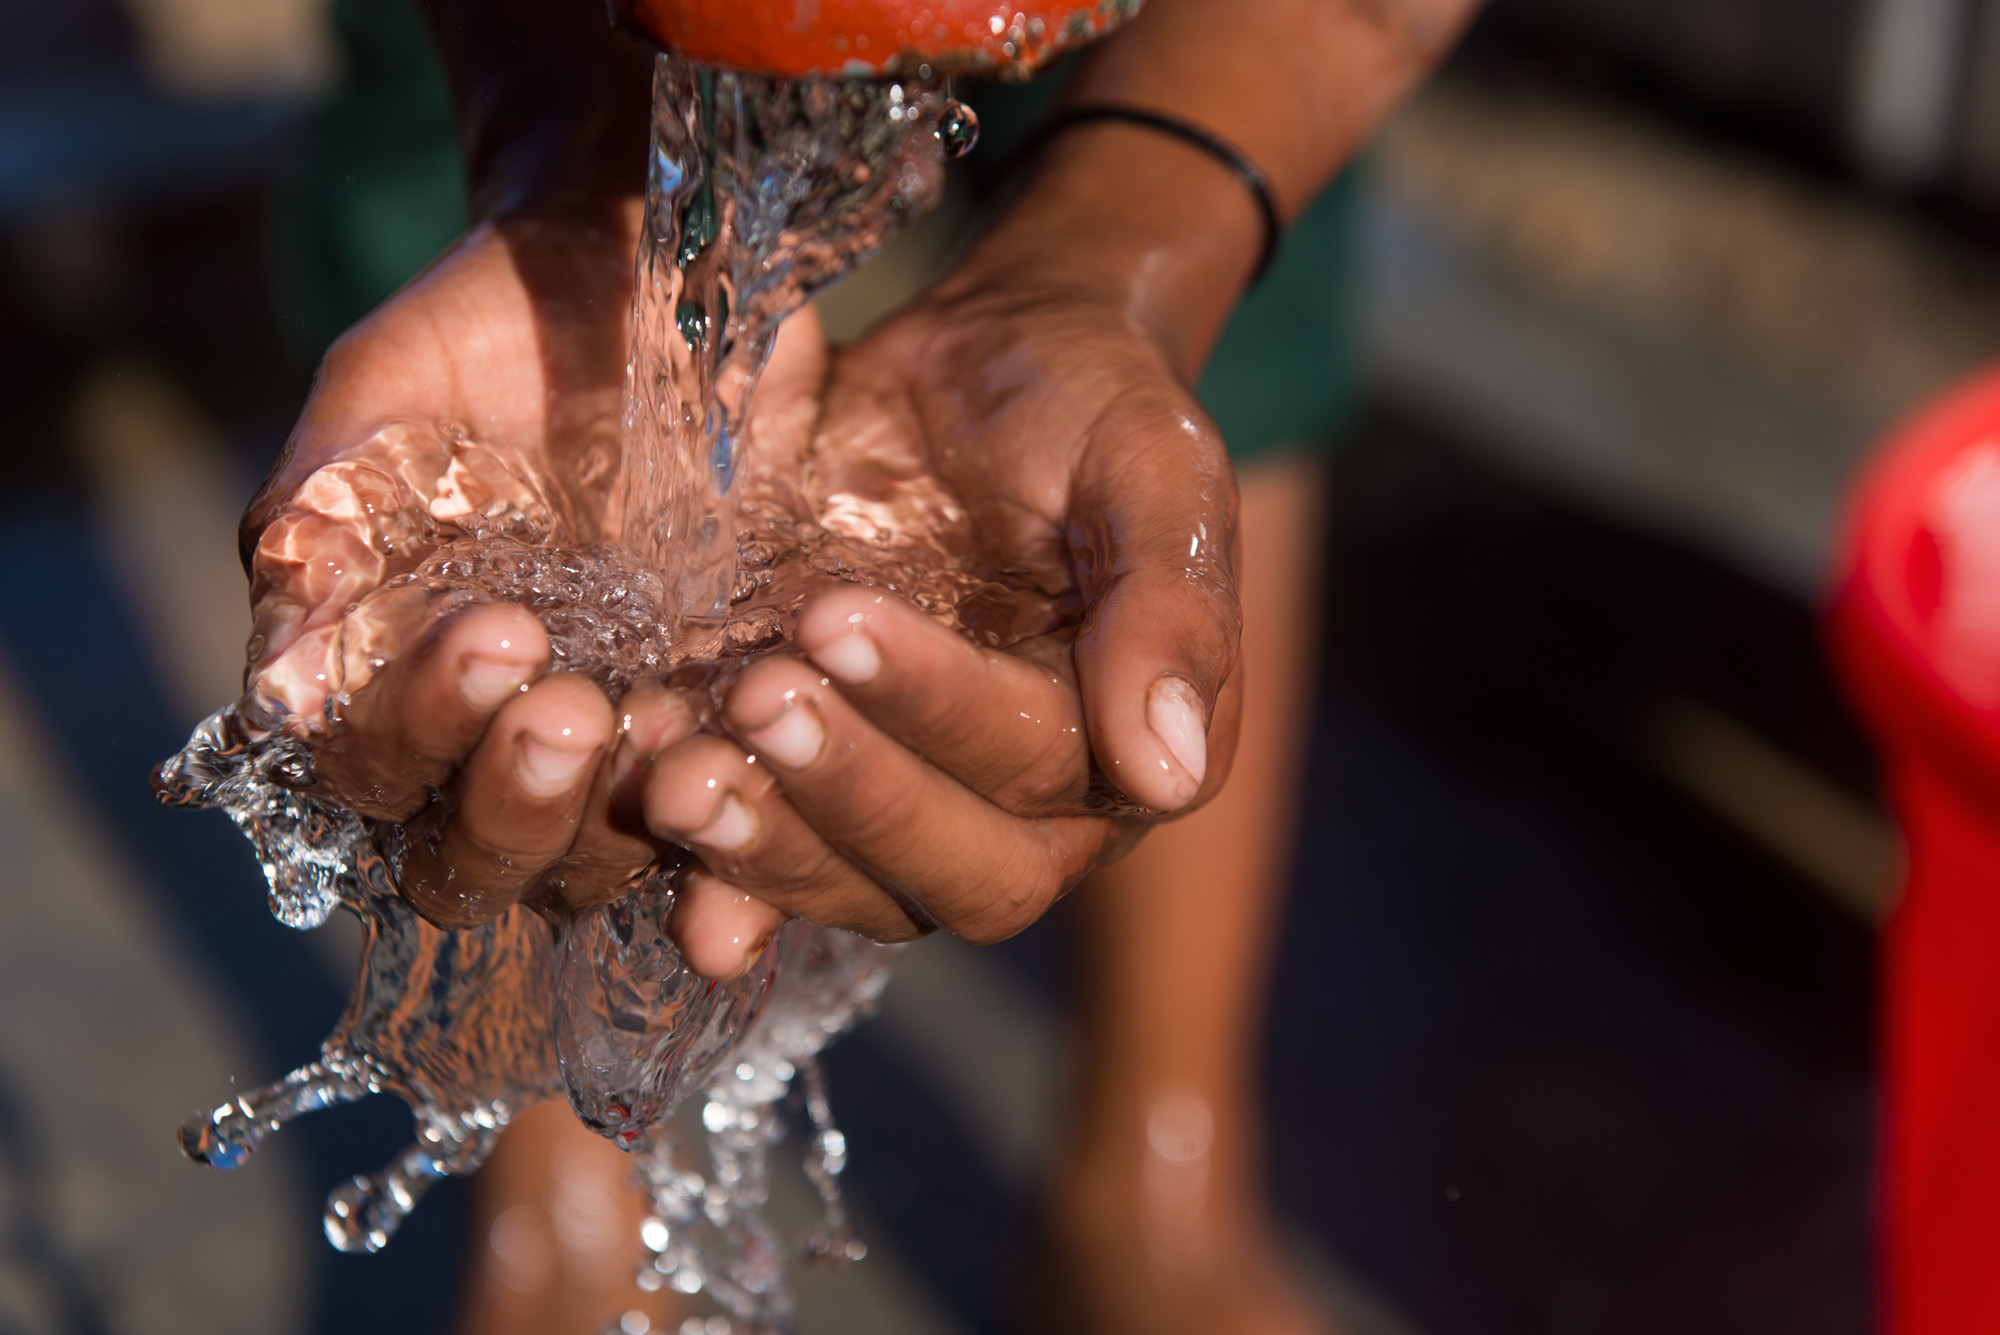 A close up of hands catching clean water from a spout